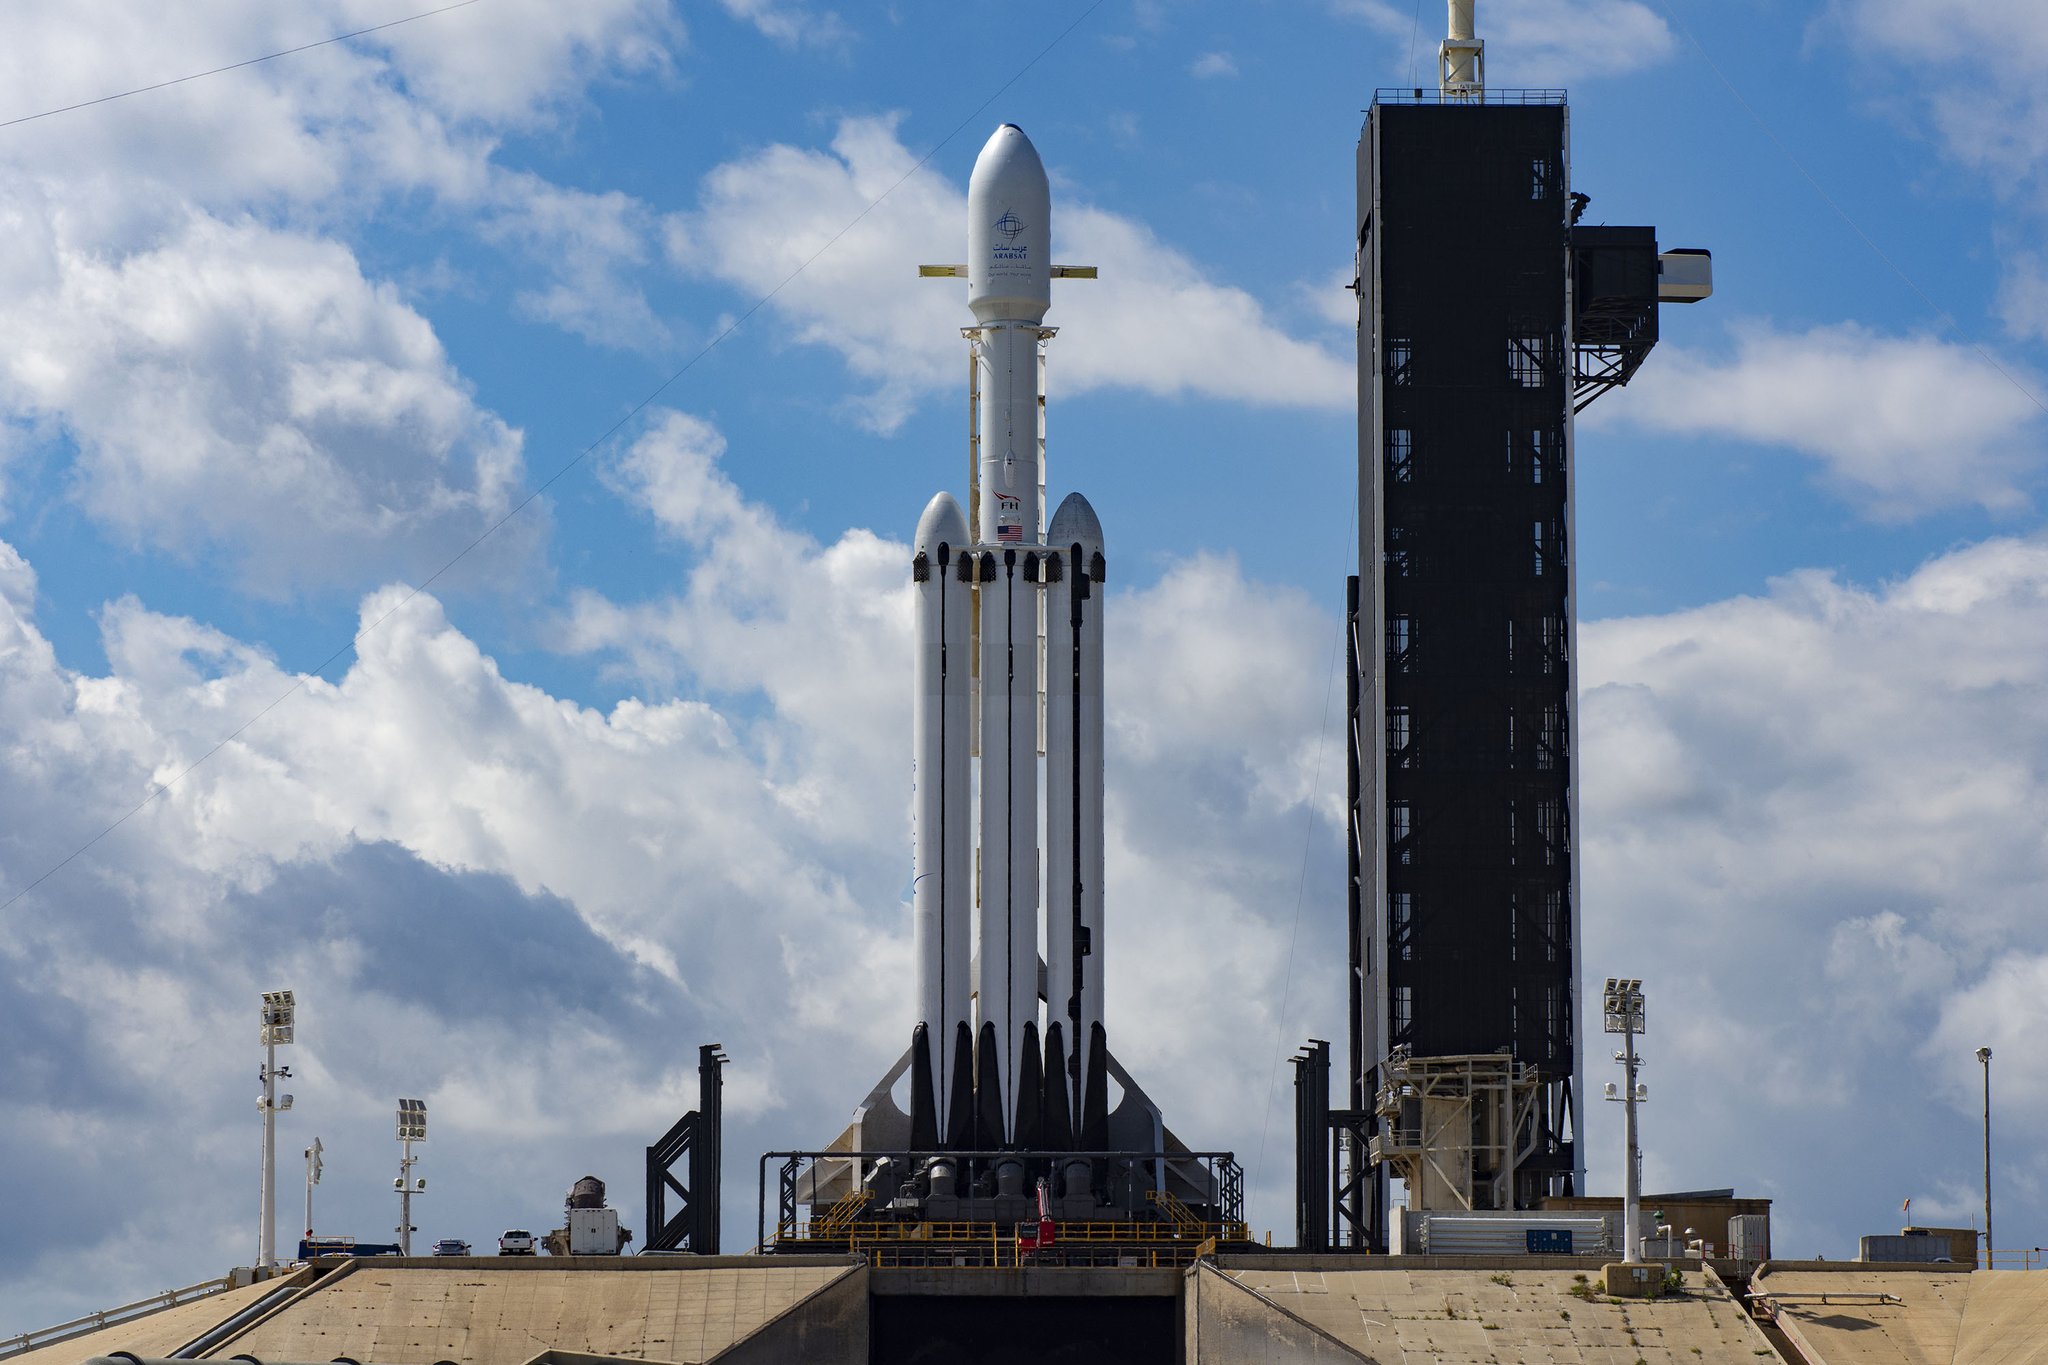 The launch of SpaceX's next Falcon Heavy rocket is scheduled for early